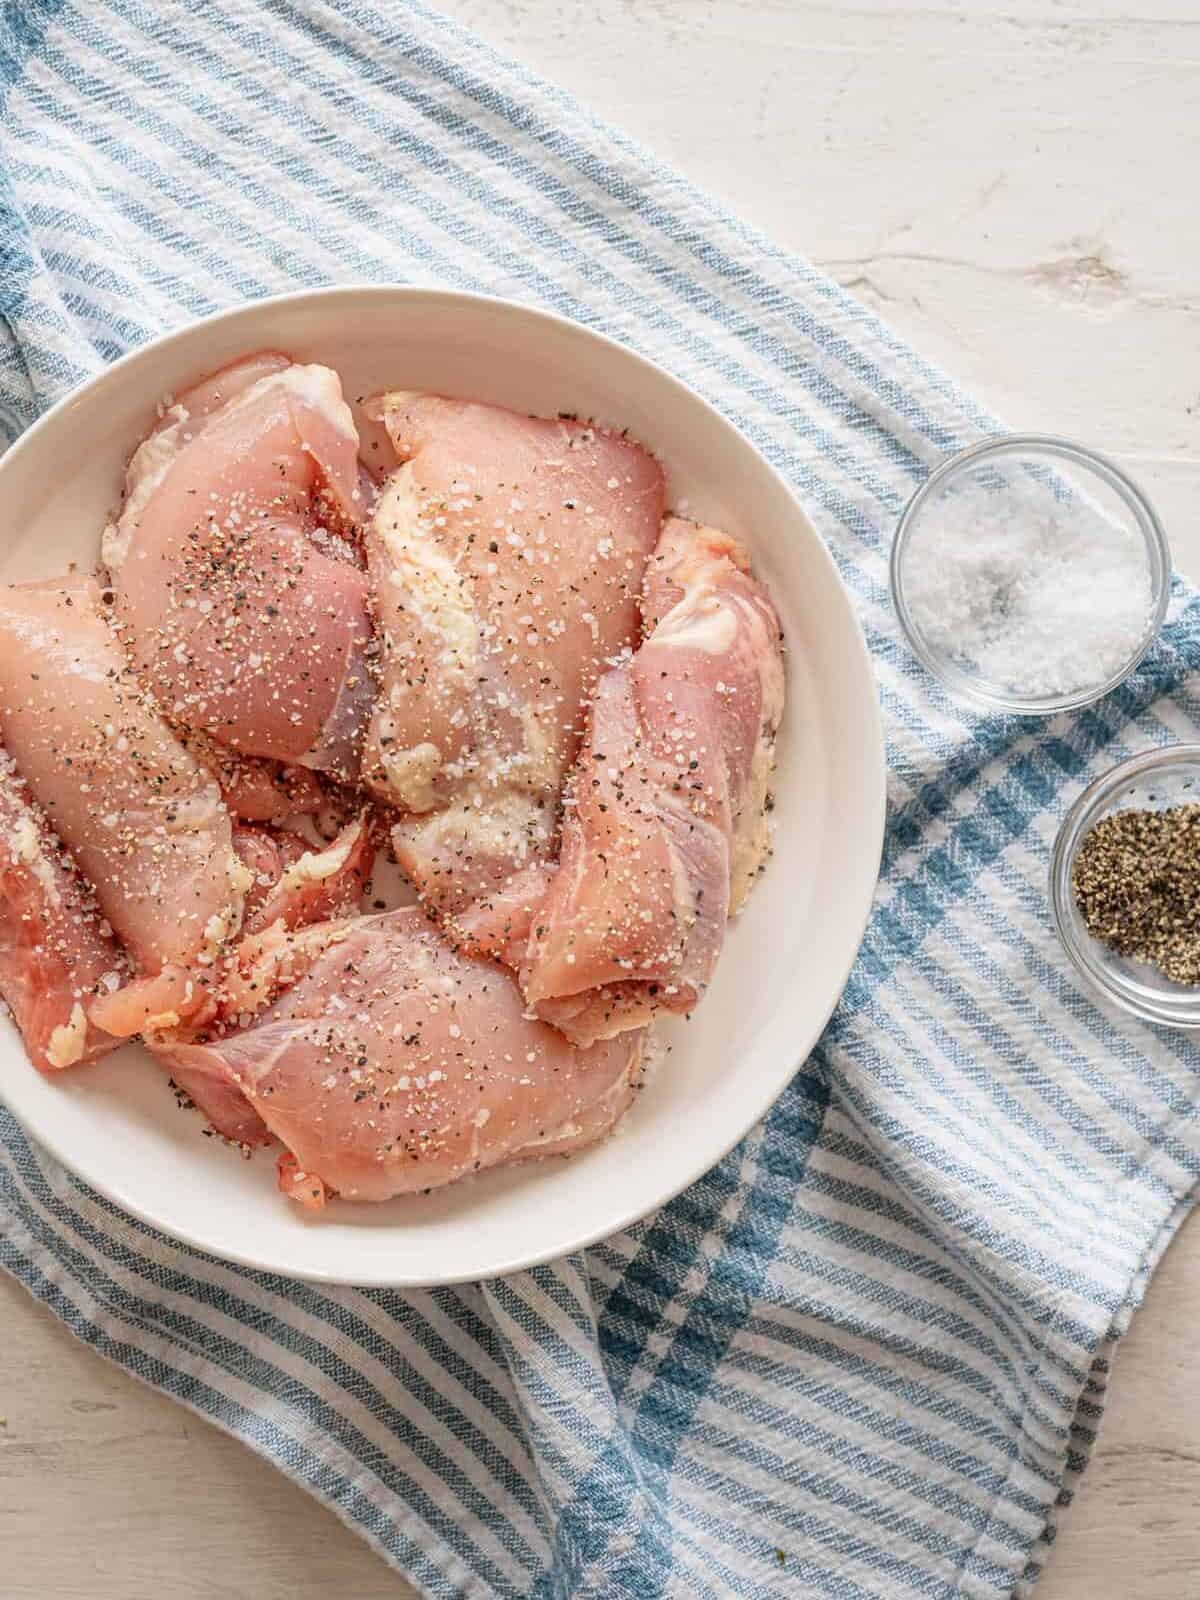 Seasoned raw chicken thighs on a plate with small bowls of salt and pepper next to it.